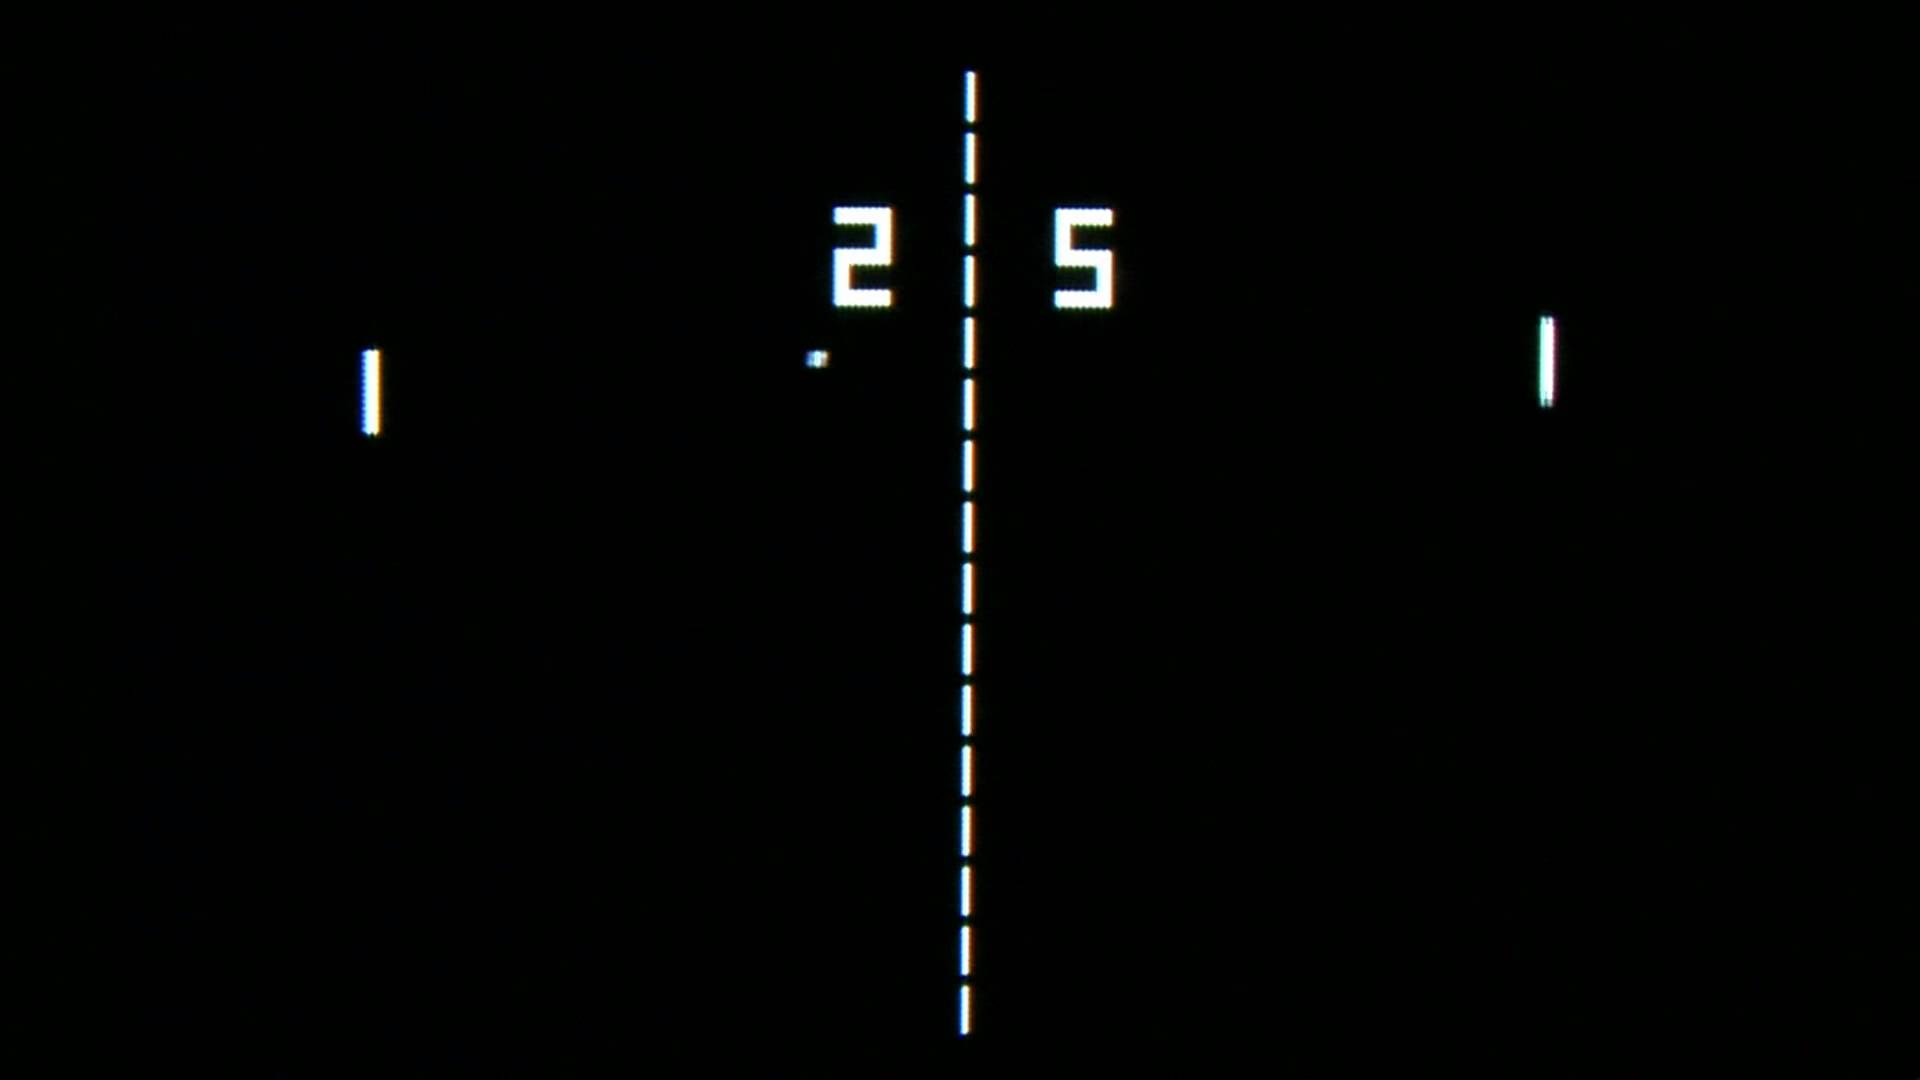 Pong - important video game